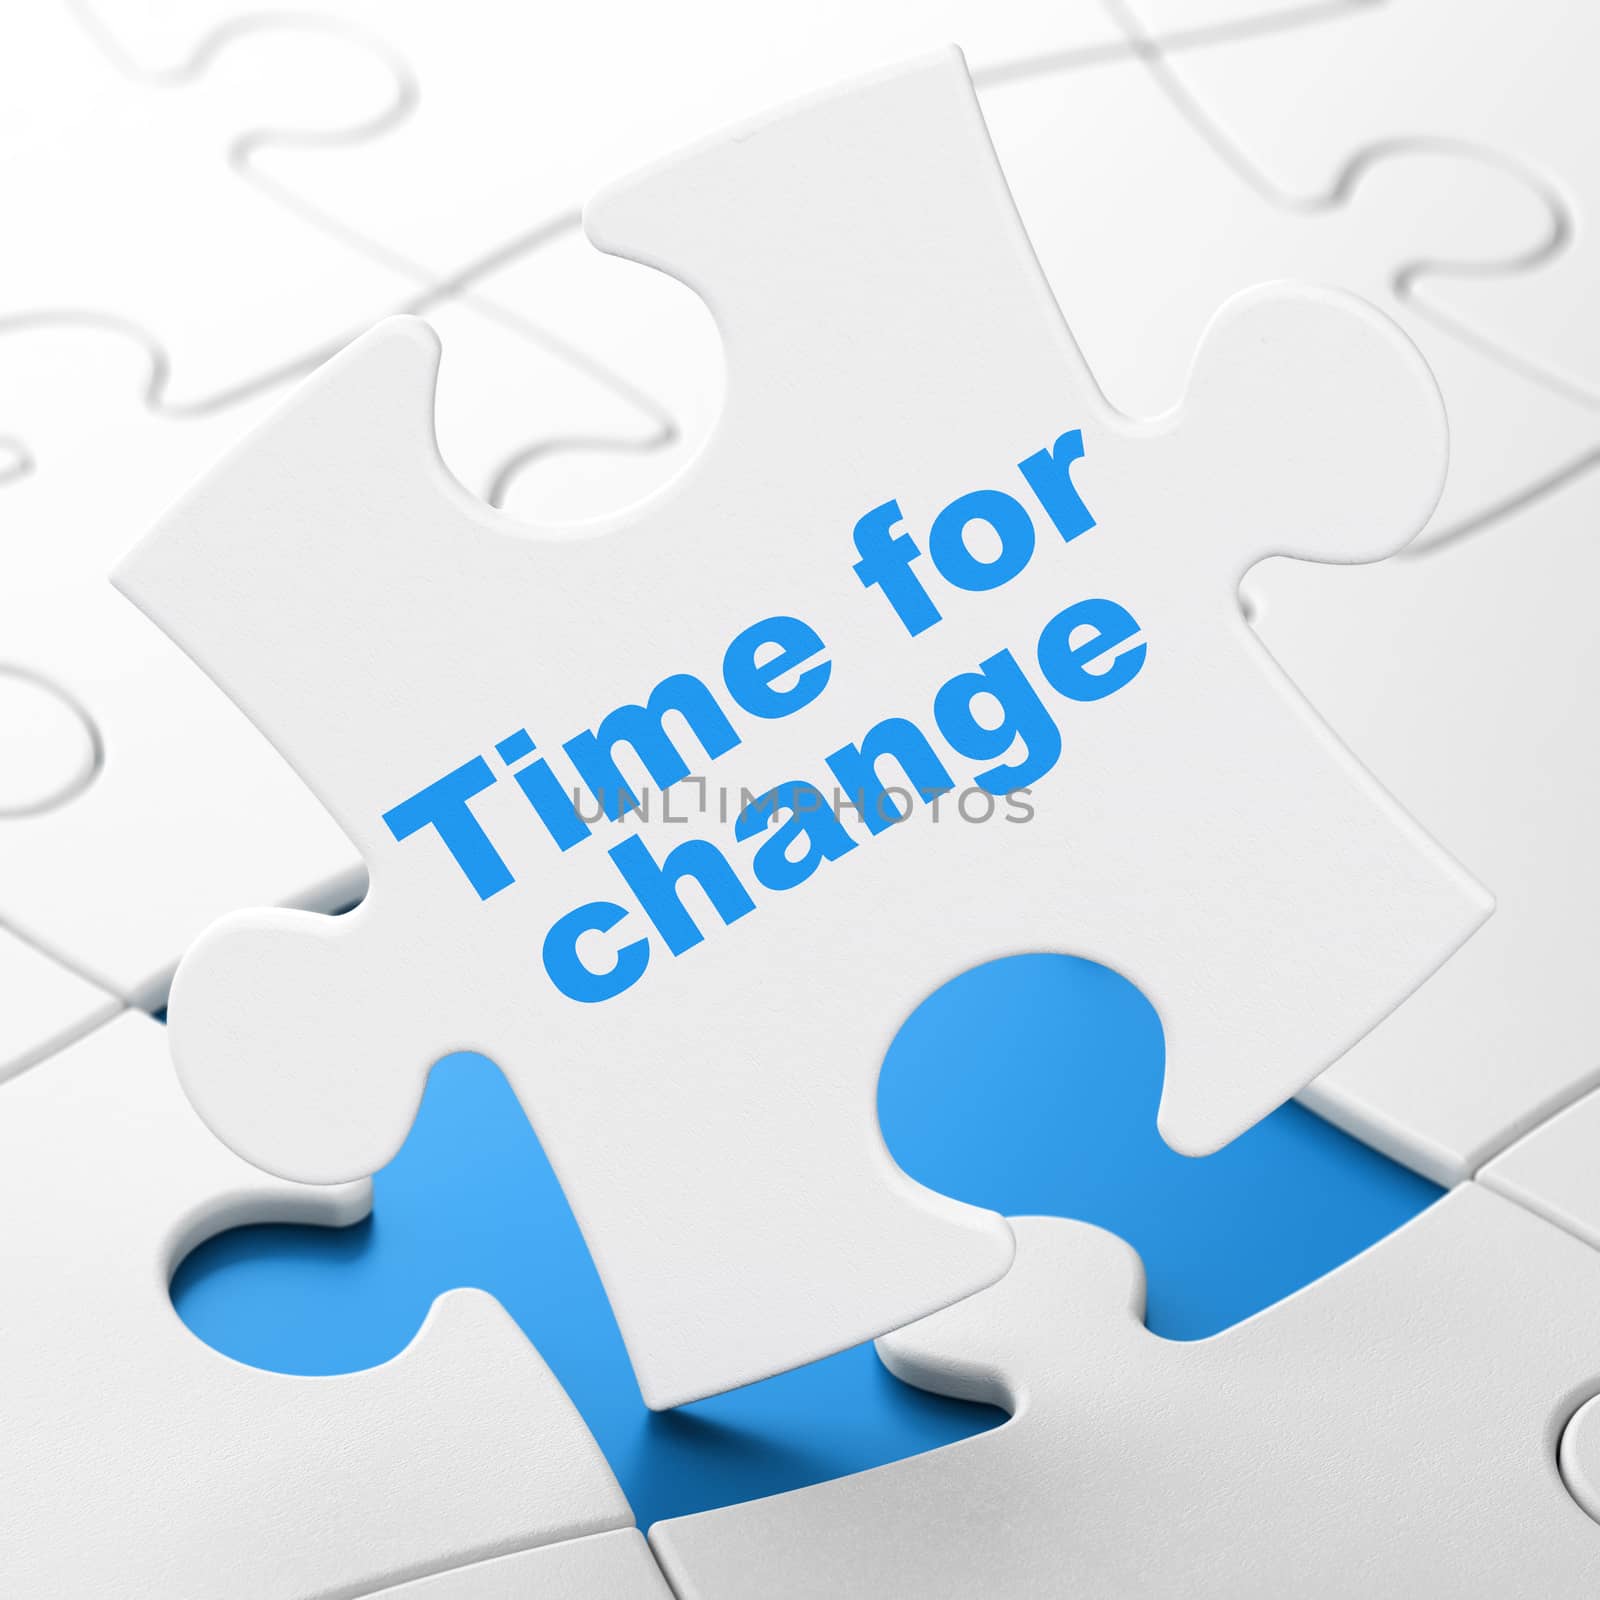 Timeline concept: Time For Change on White puzzle pieces background, 3D rendering